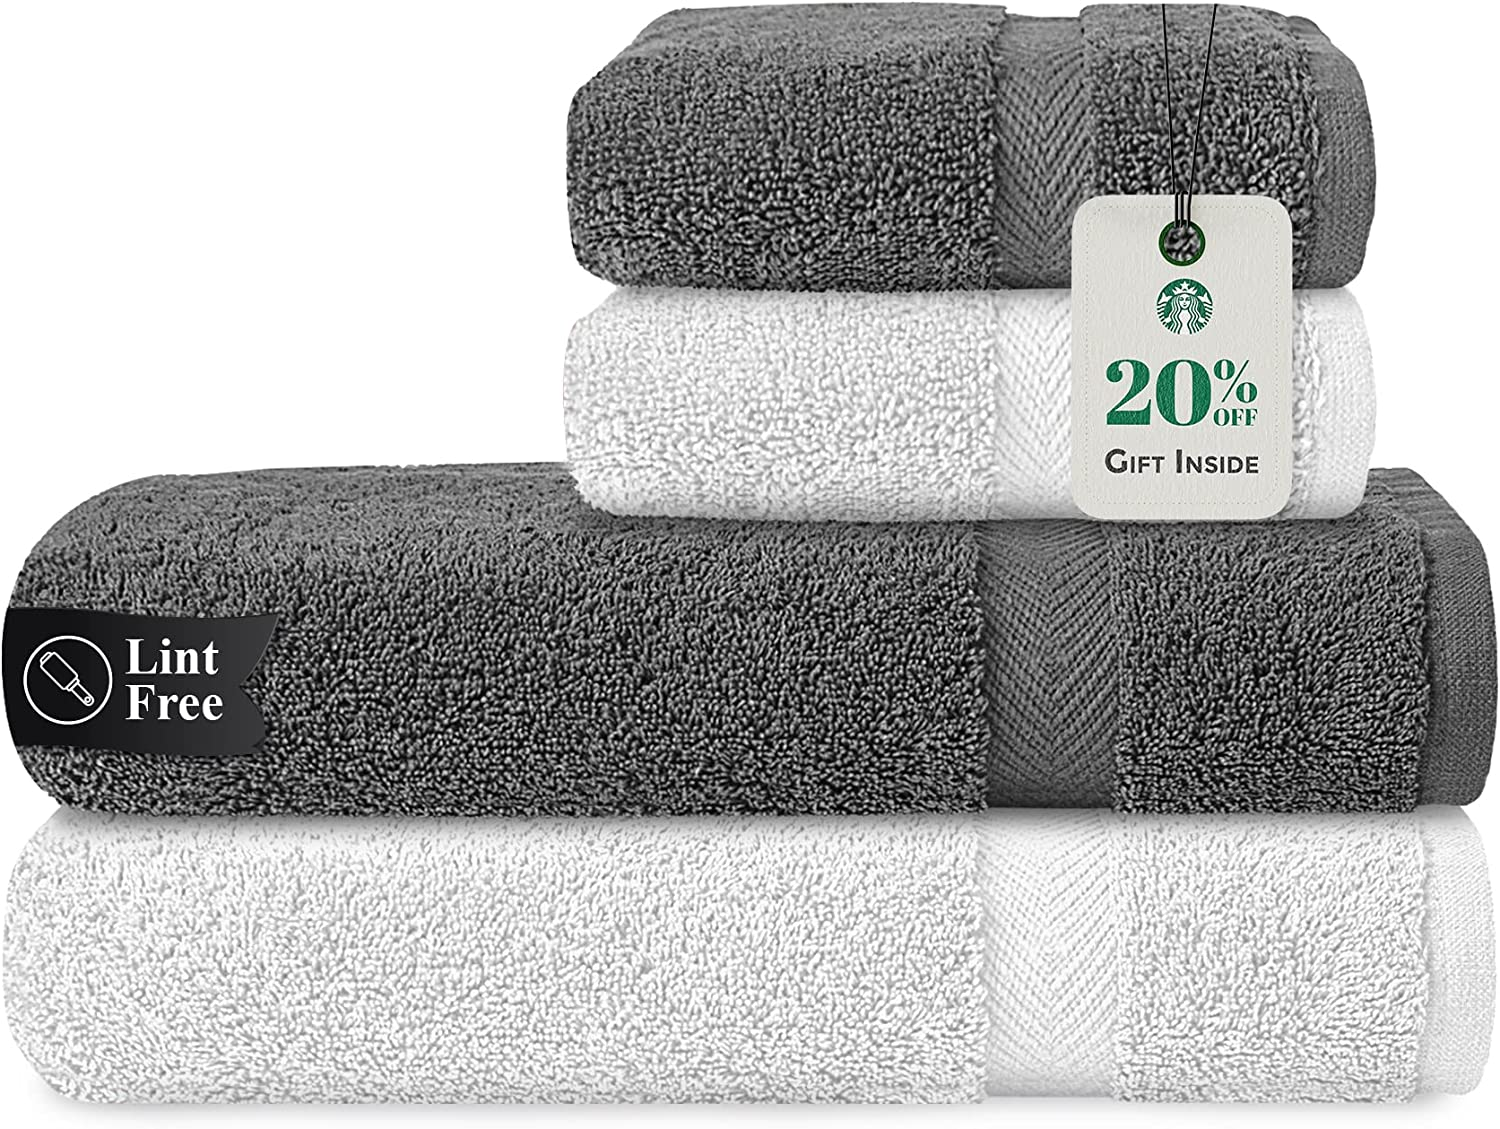 Stony Edge Towel Set, 2 Bath Towels & 2 Hand Towels, 100% Cotton, 600 GSM, Soft & Absorbent for Bathroom, Kitchen, Gym & Spa, White & Gray